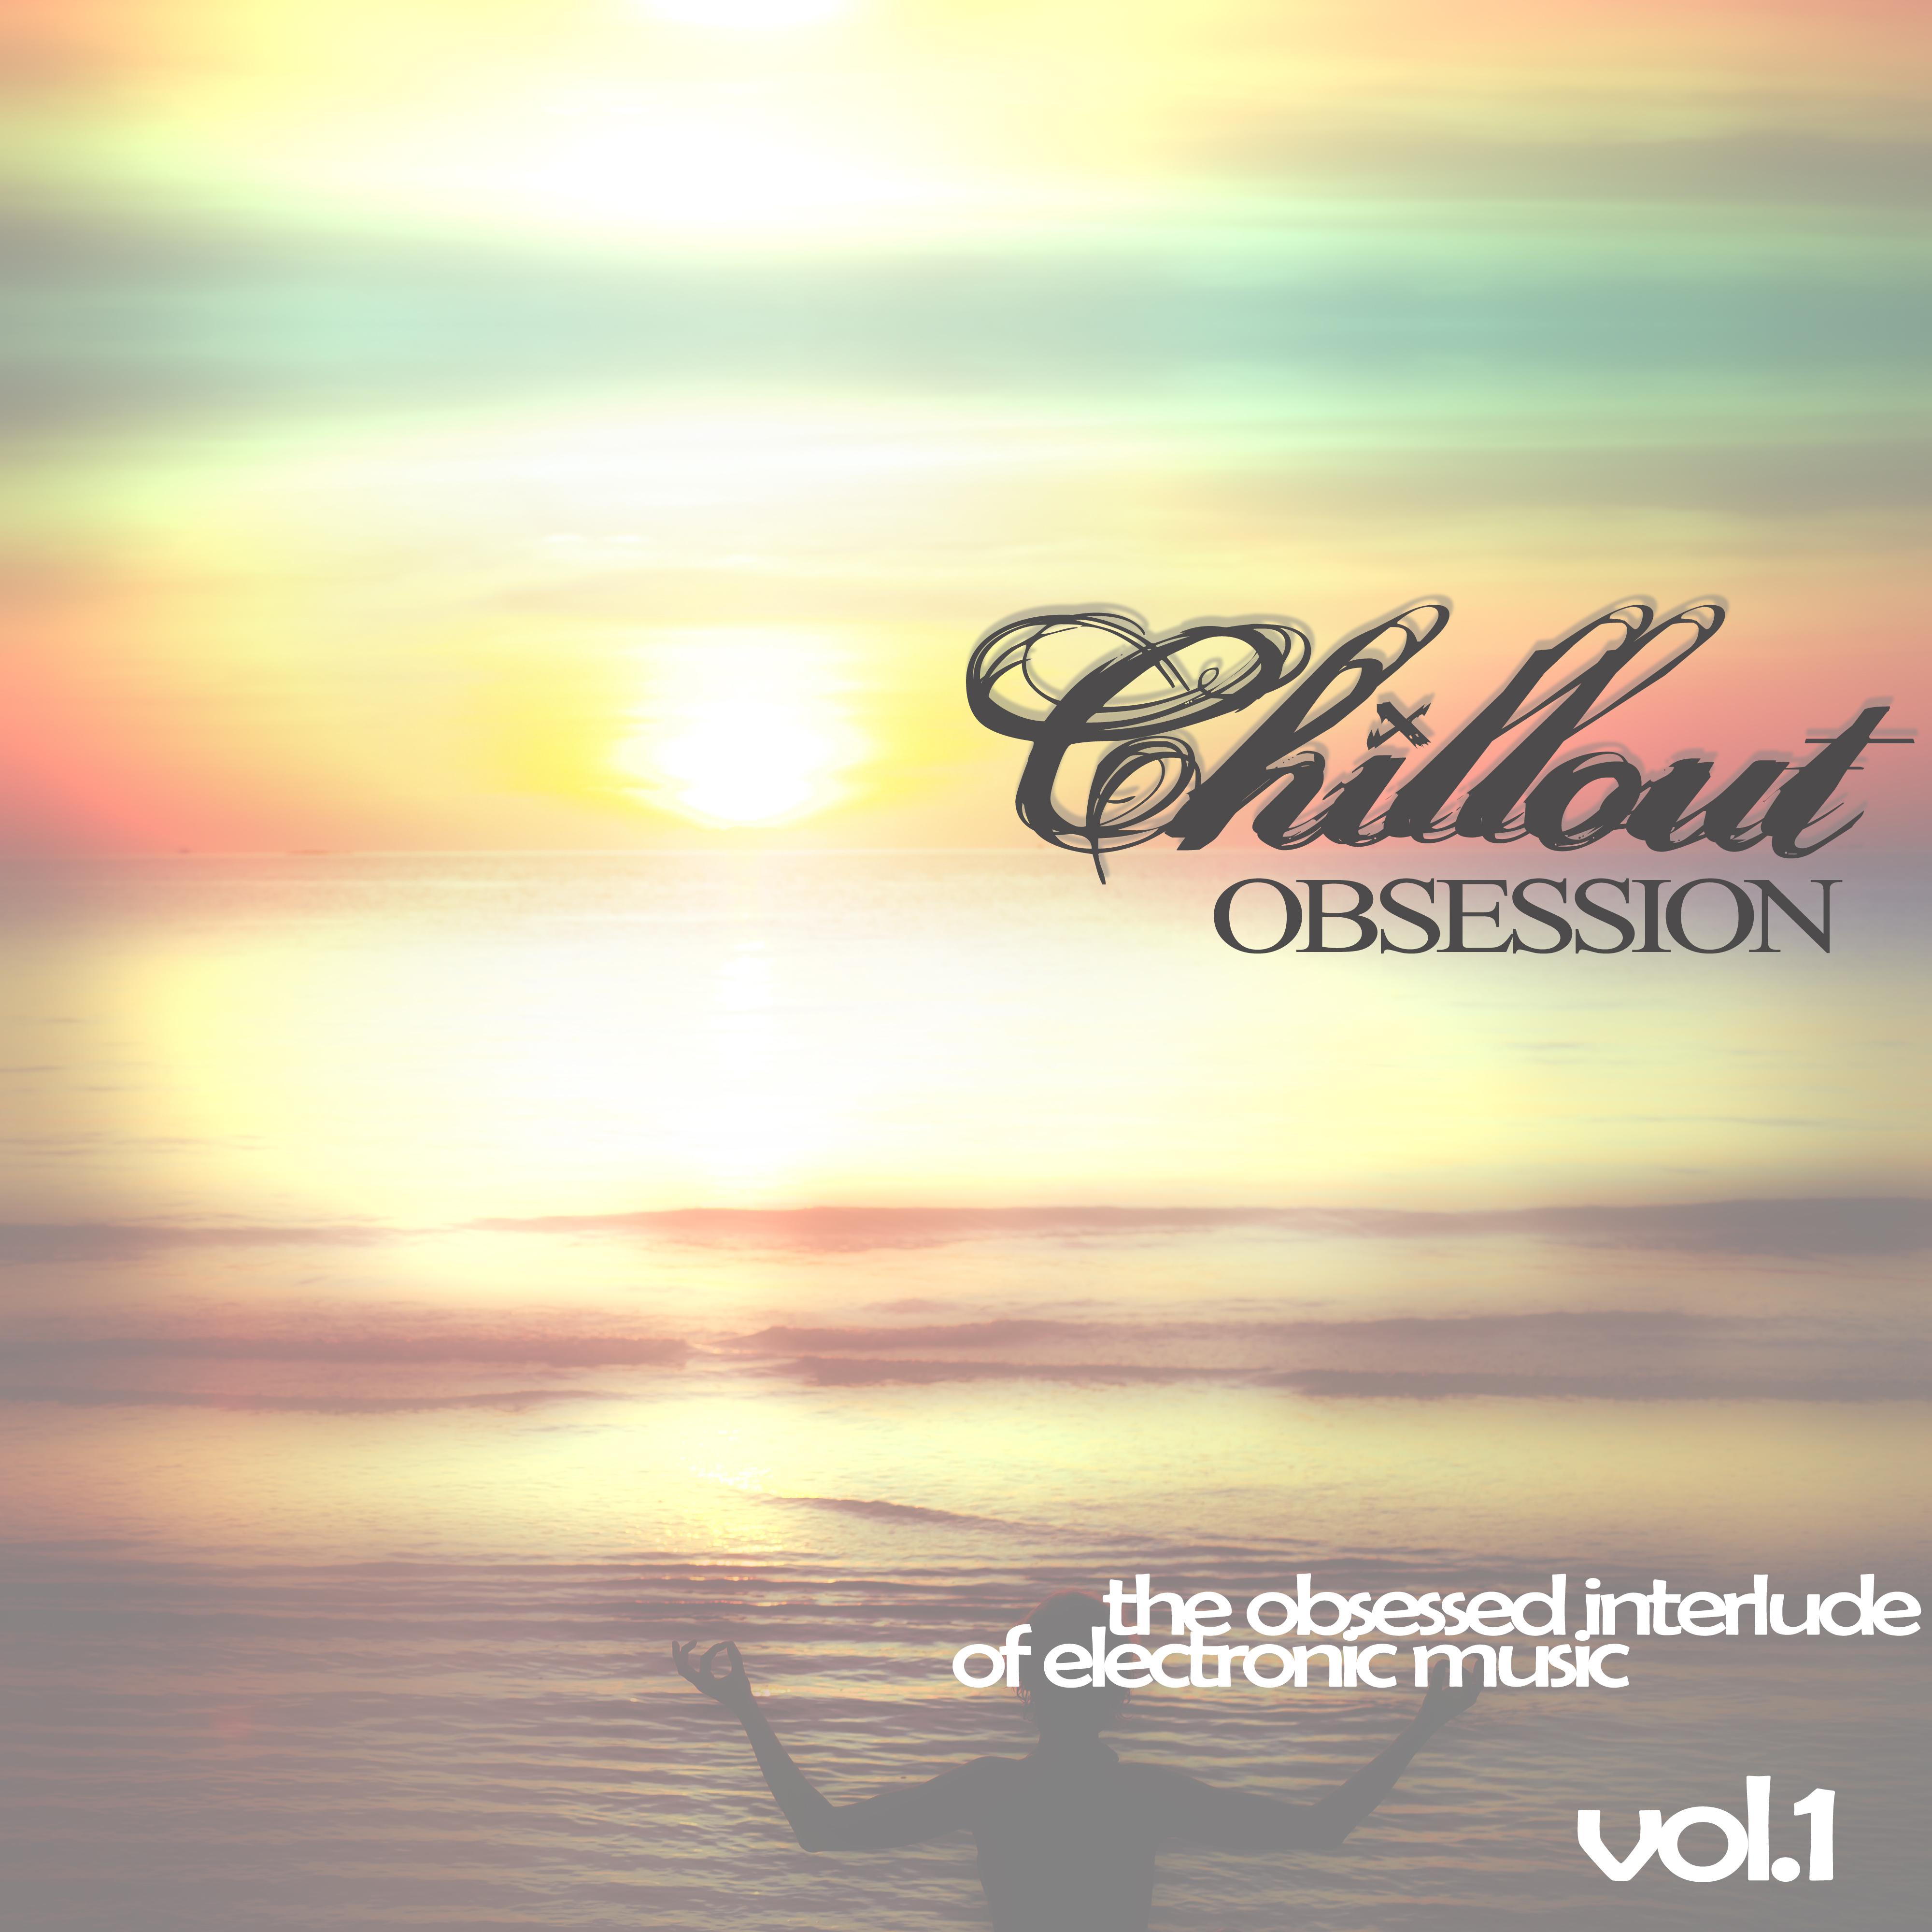 Chillout Obsession - The Obsessed Interlude of Electronic Music, Vol. 1